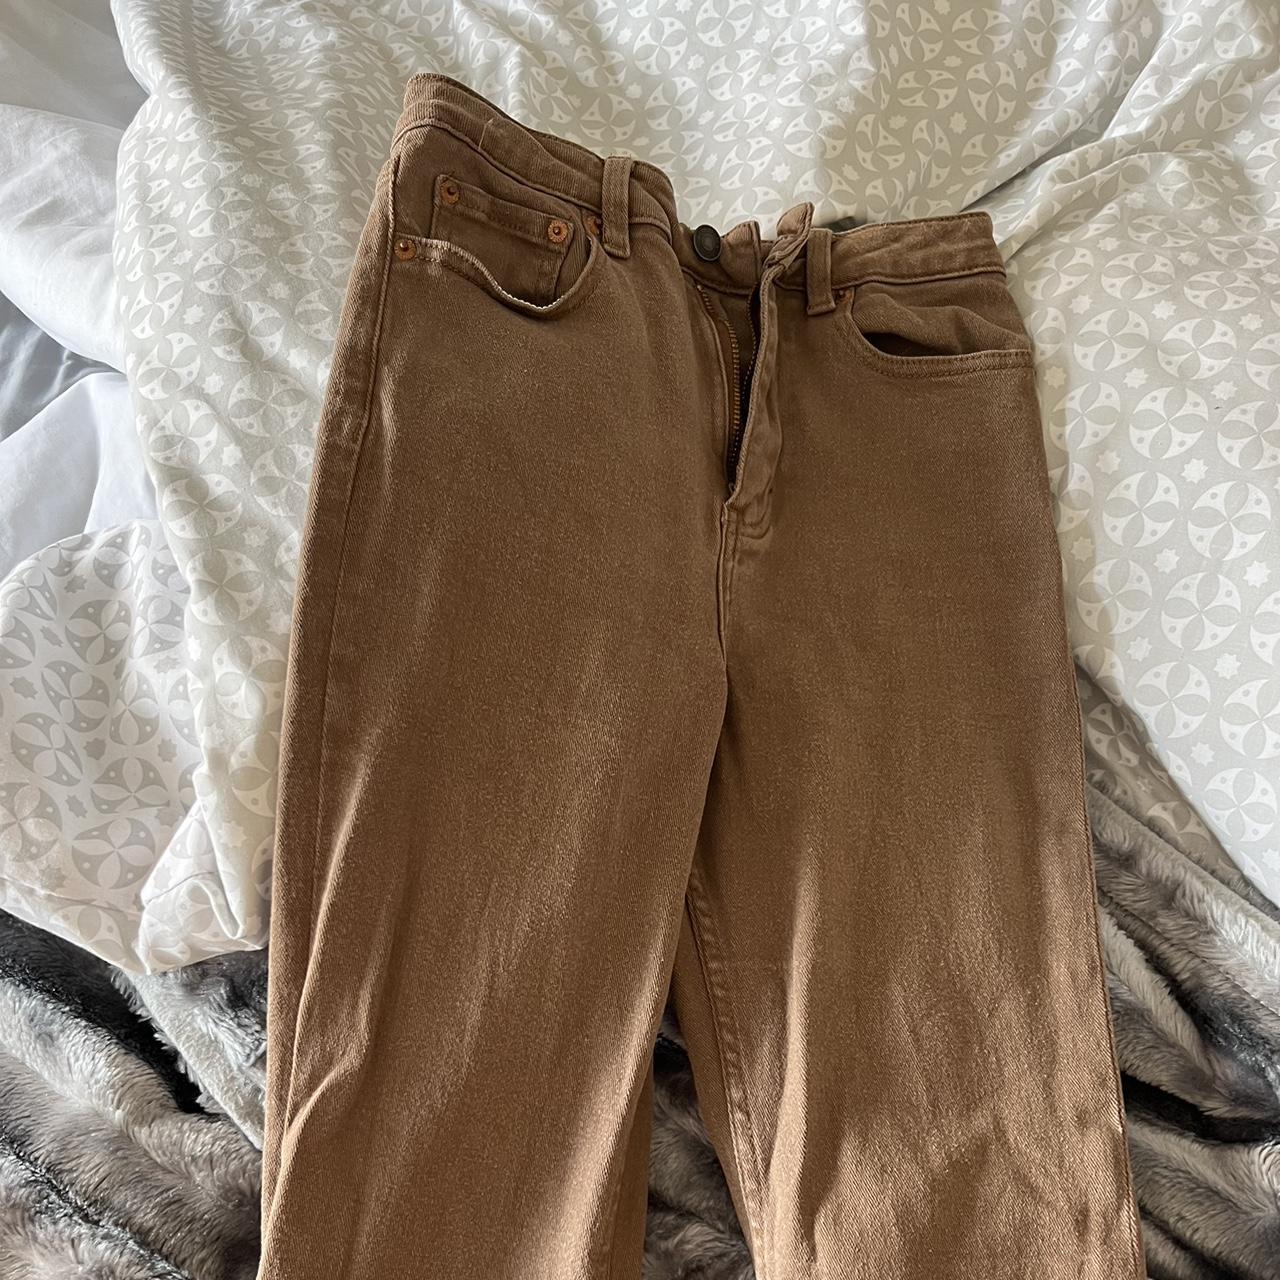 Bootleg Jeans in Rich Brown